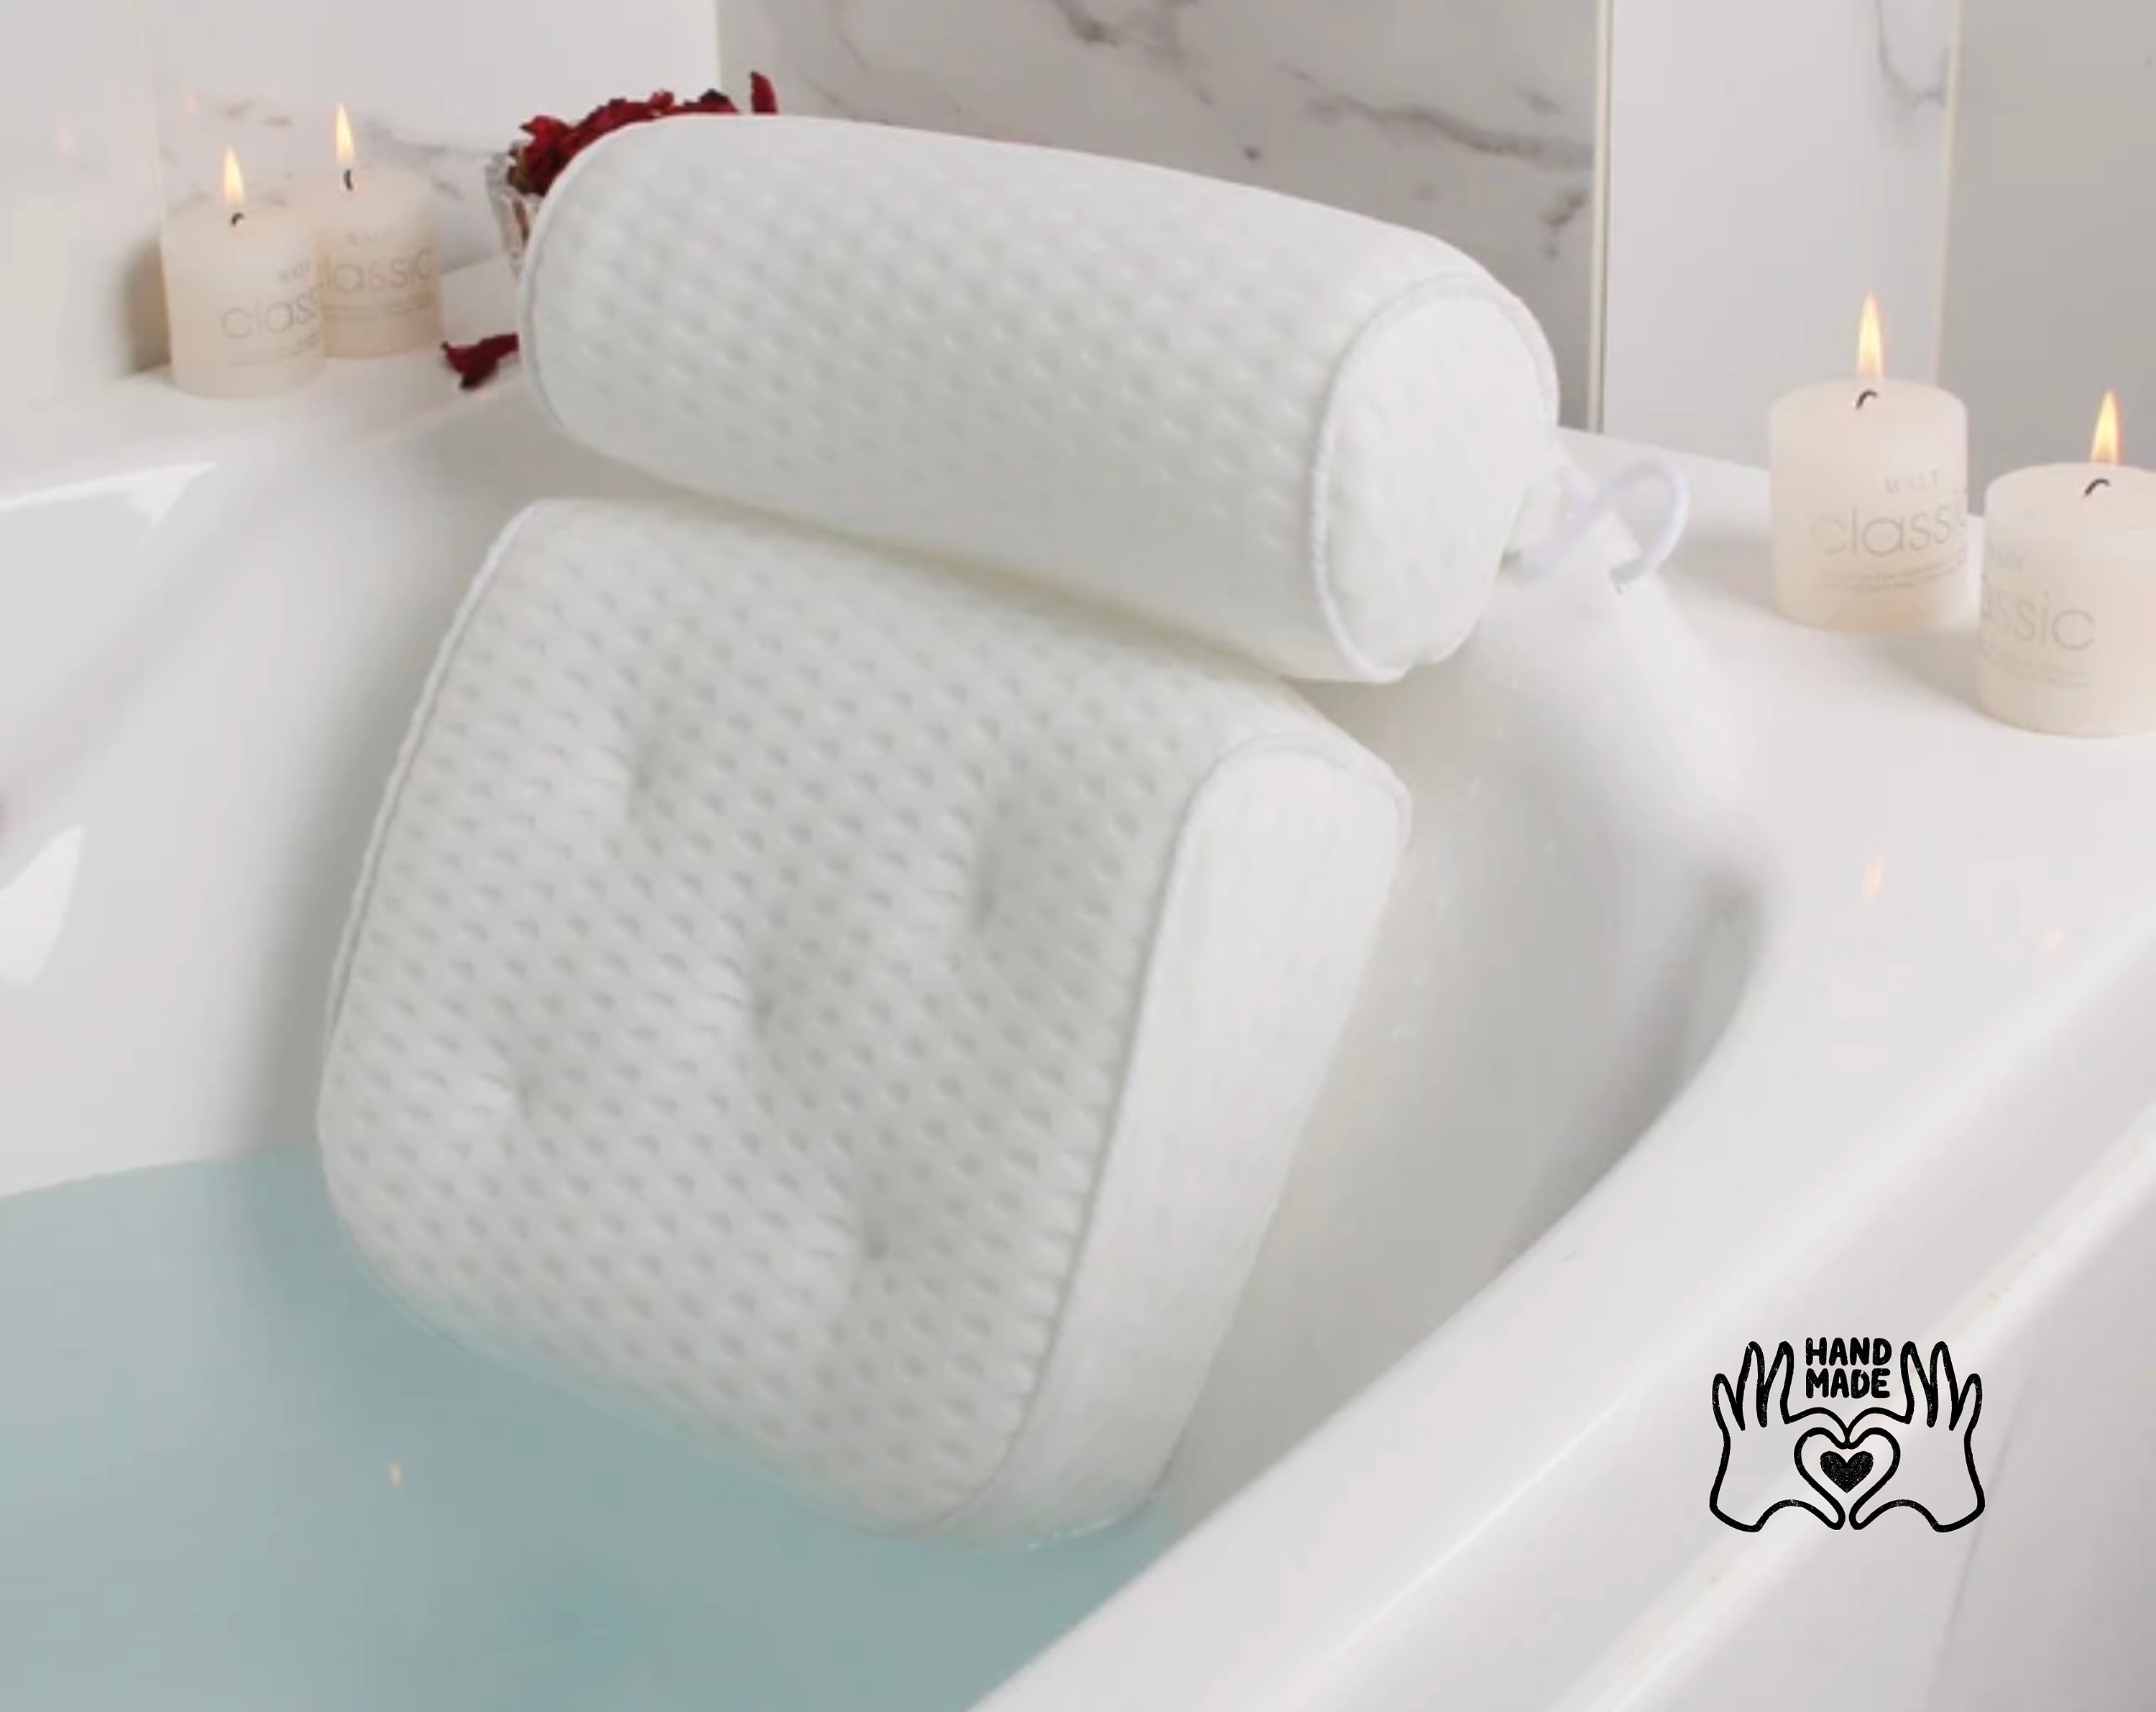 SelectSoma Bath Pillows for Tub Neck and Back Support - Bath Pillow fo